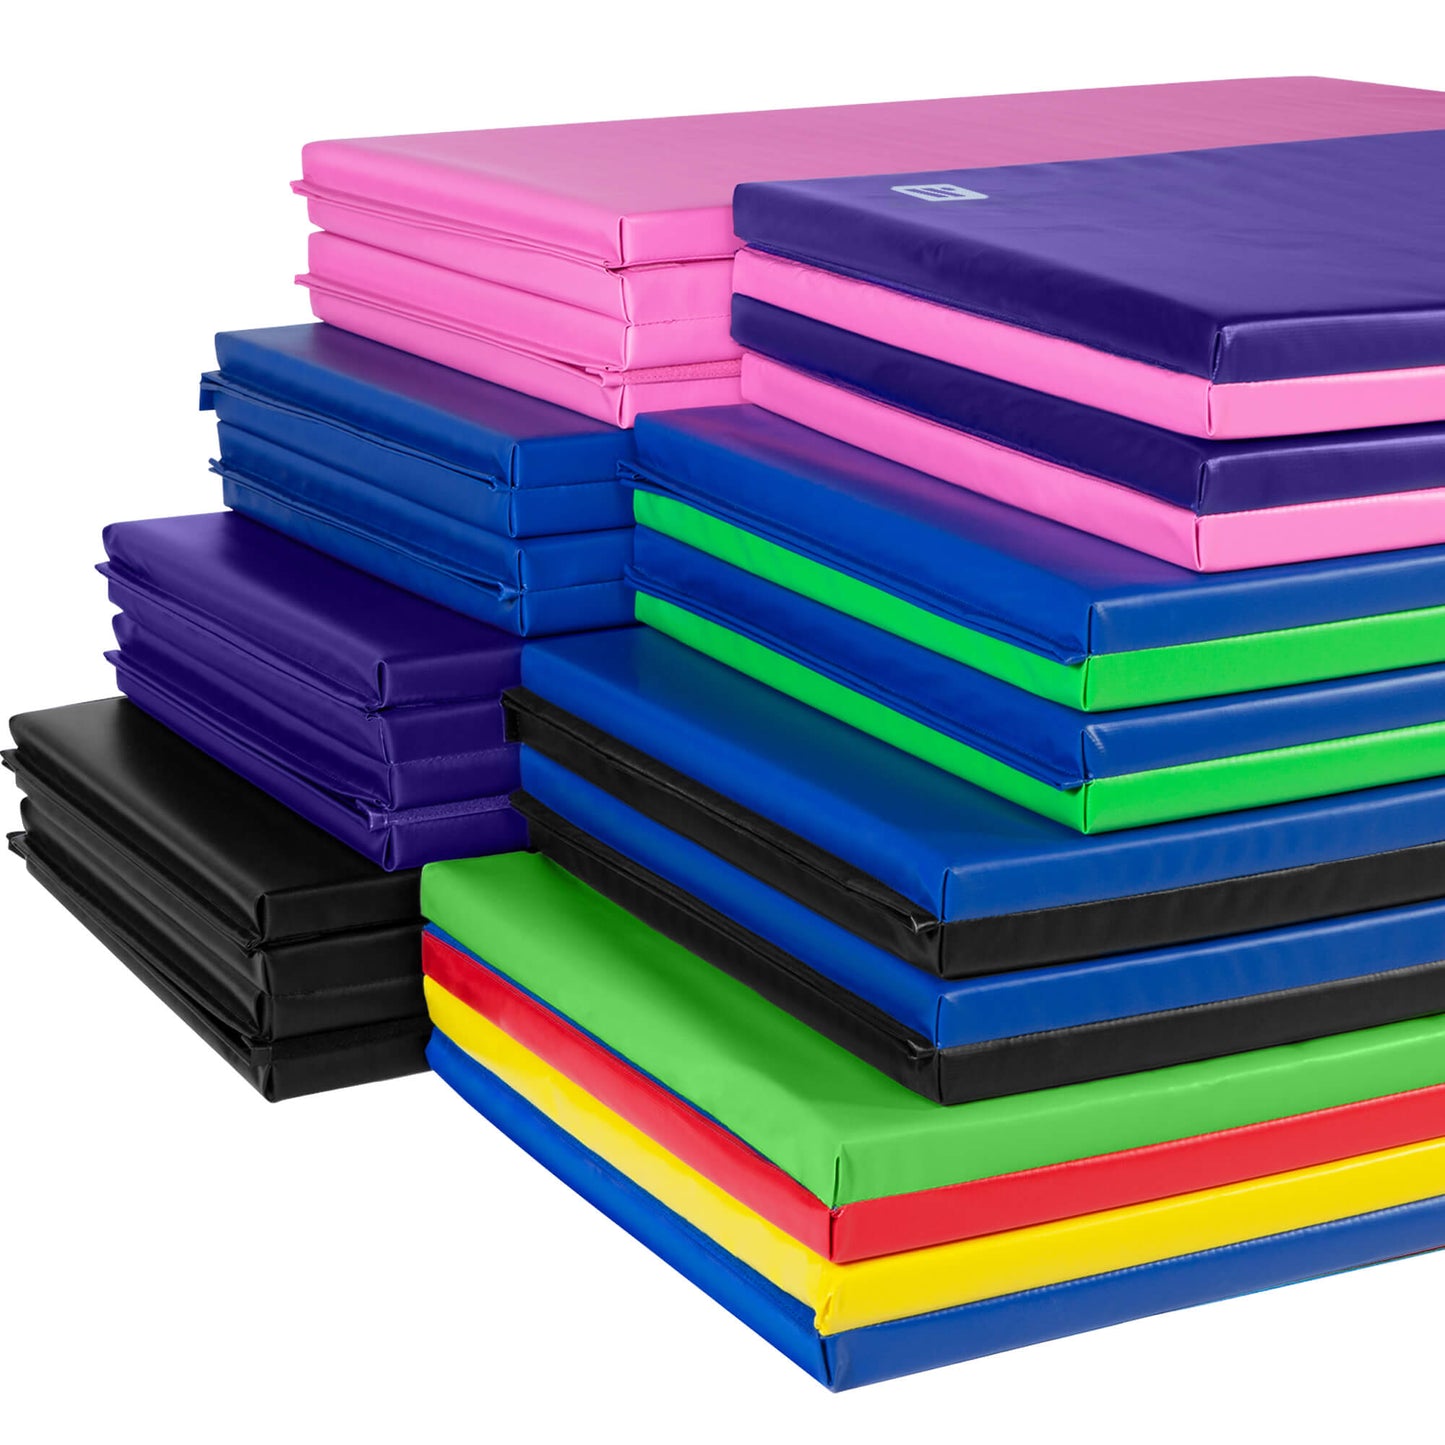 Stacked 4x8 Exercise Mats Multiple Colors